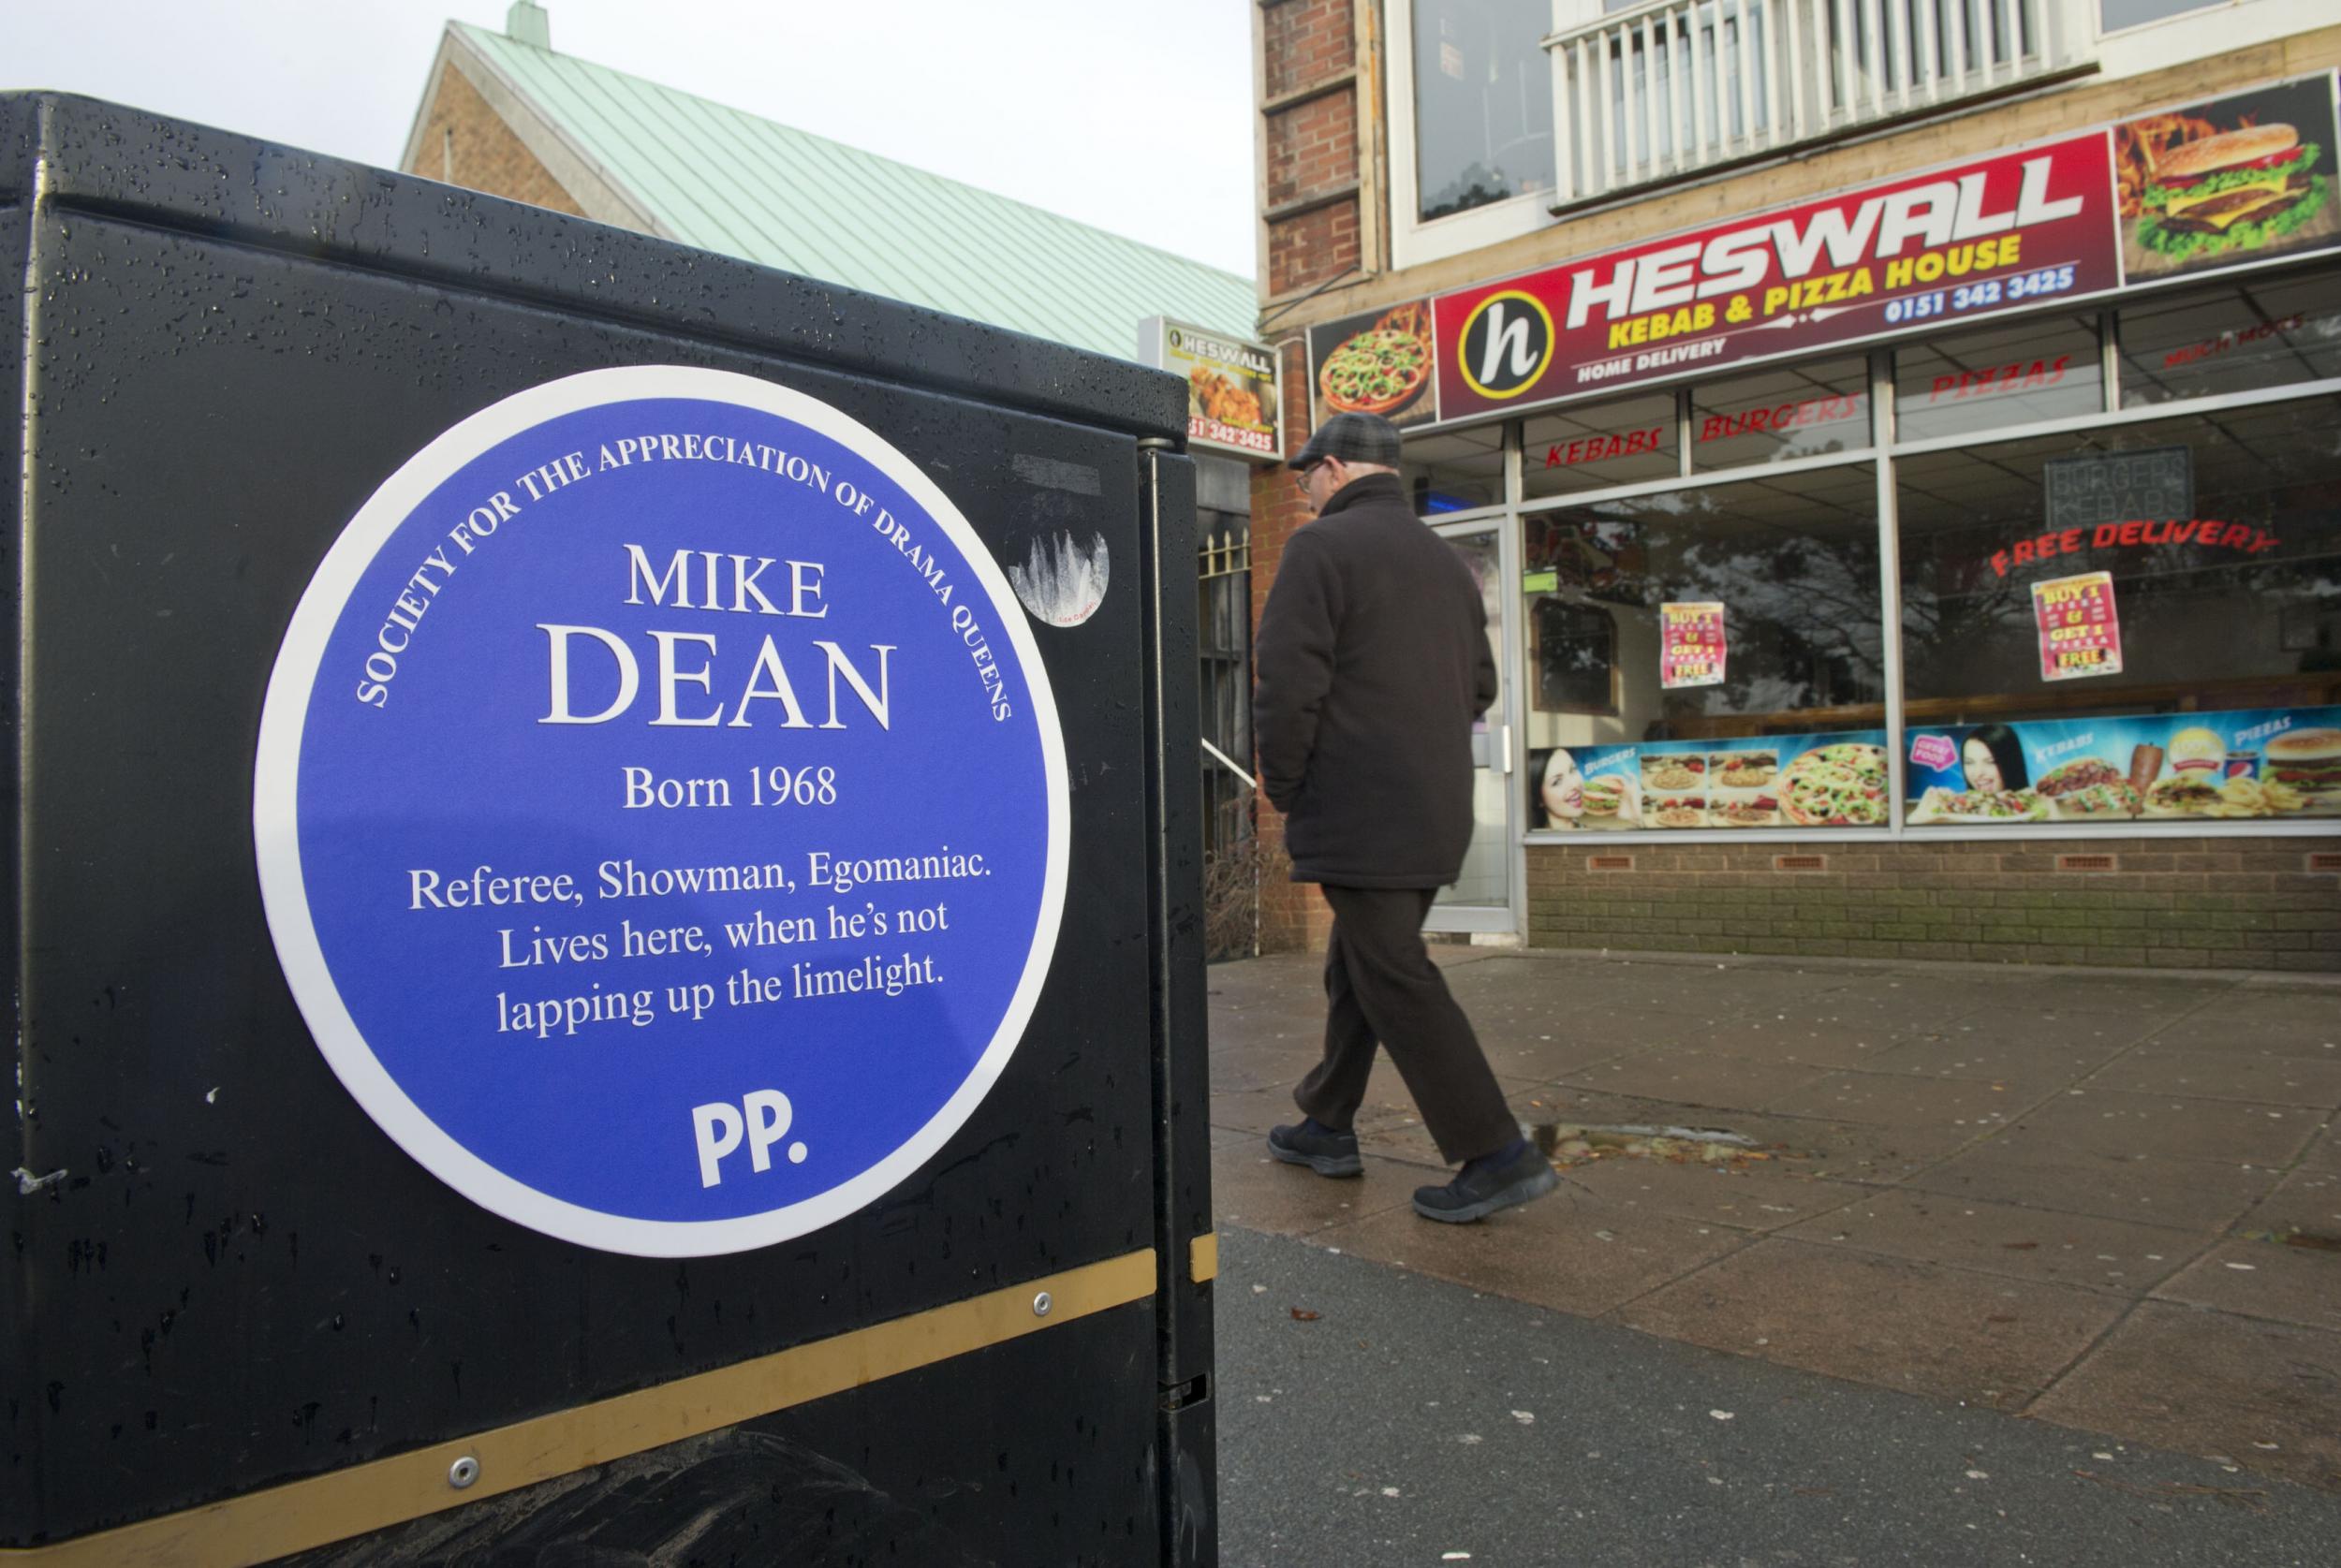 Mike Dean's 100th red card was commemorated with a plaque